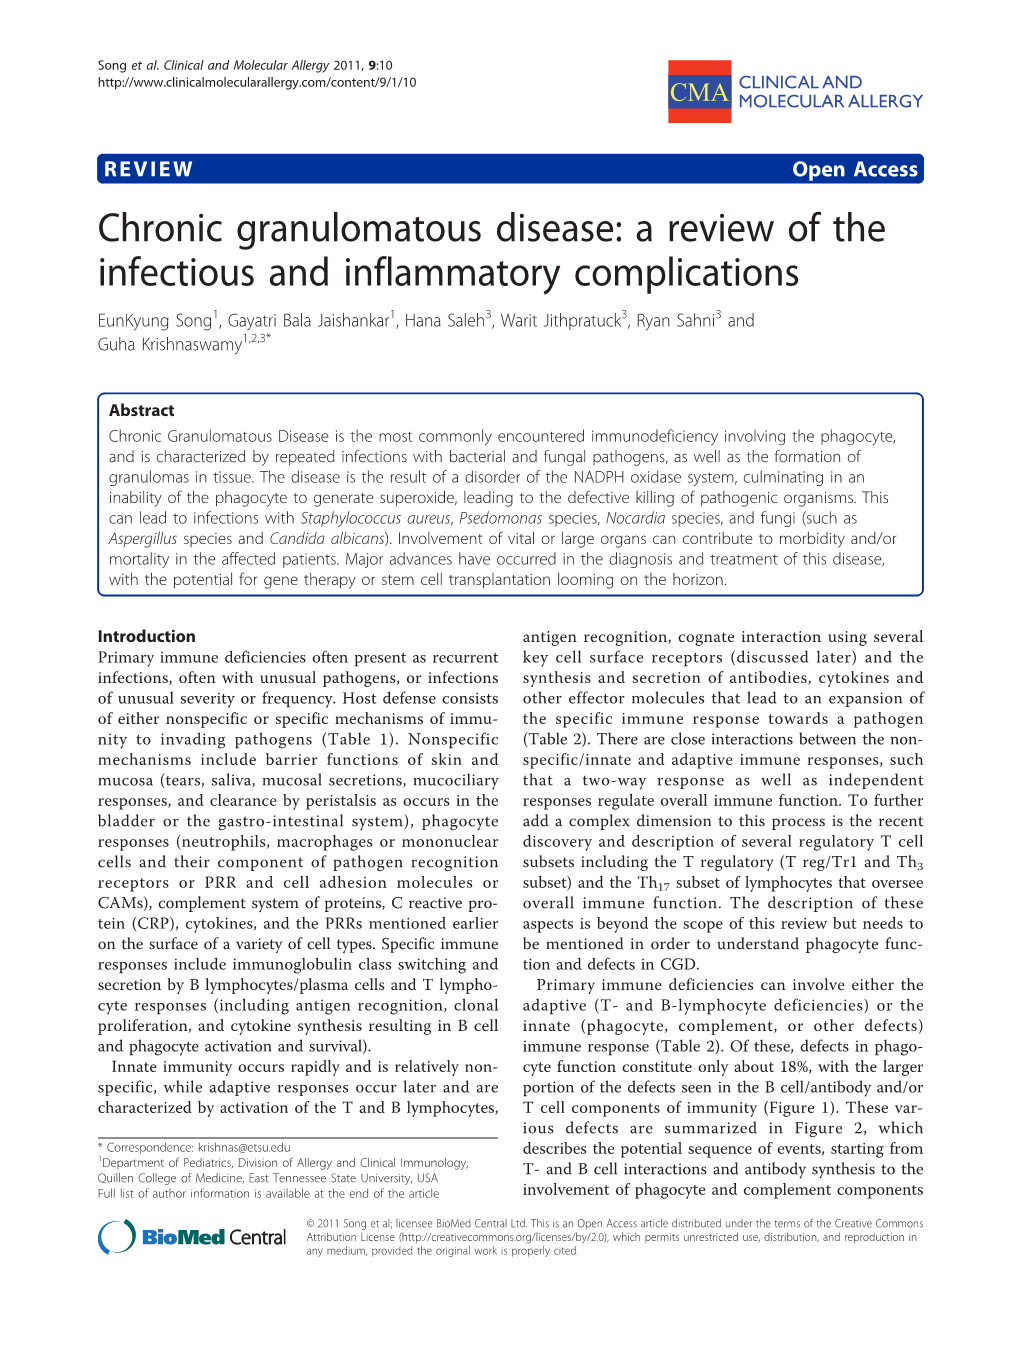 Chronic Granulomatous Disease: a Review of the Infectious And